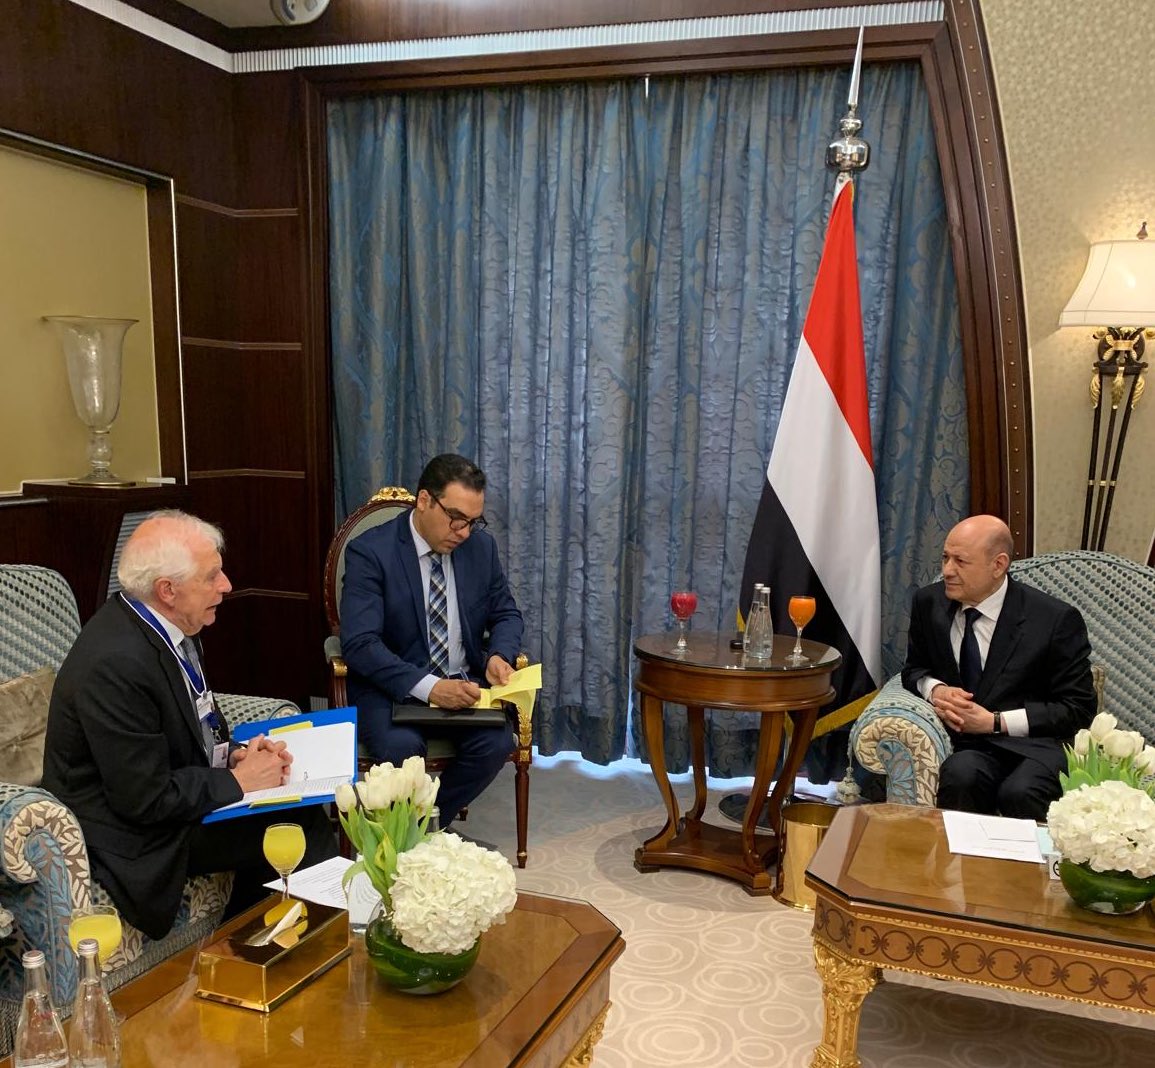 I met today in Riyadh with the President of Yemen Dr Rashad Al Alimi to express EU’s support to the Yemeni people and the Presidential Leadership Council. We also discussed the urgency to reinvigorate the @UN-led peace process and address the humanitarian catastrophe. 🧵 1/2